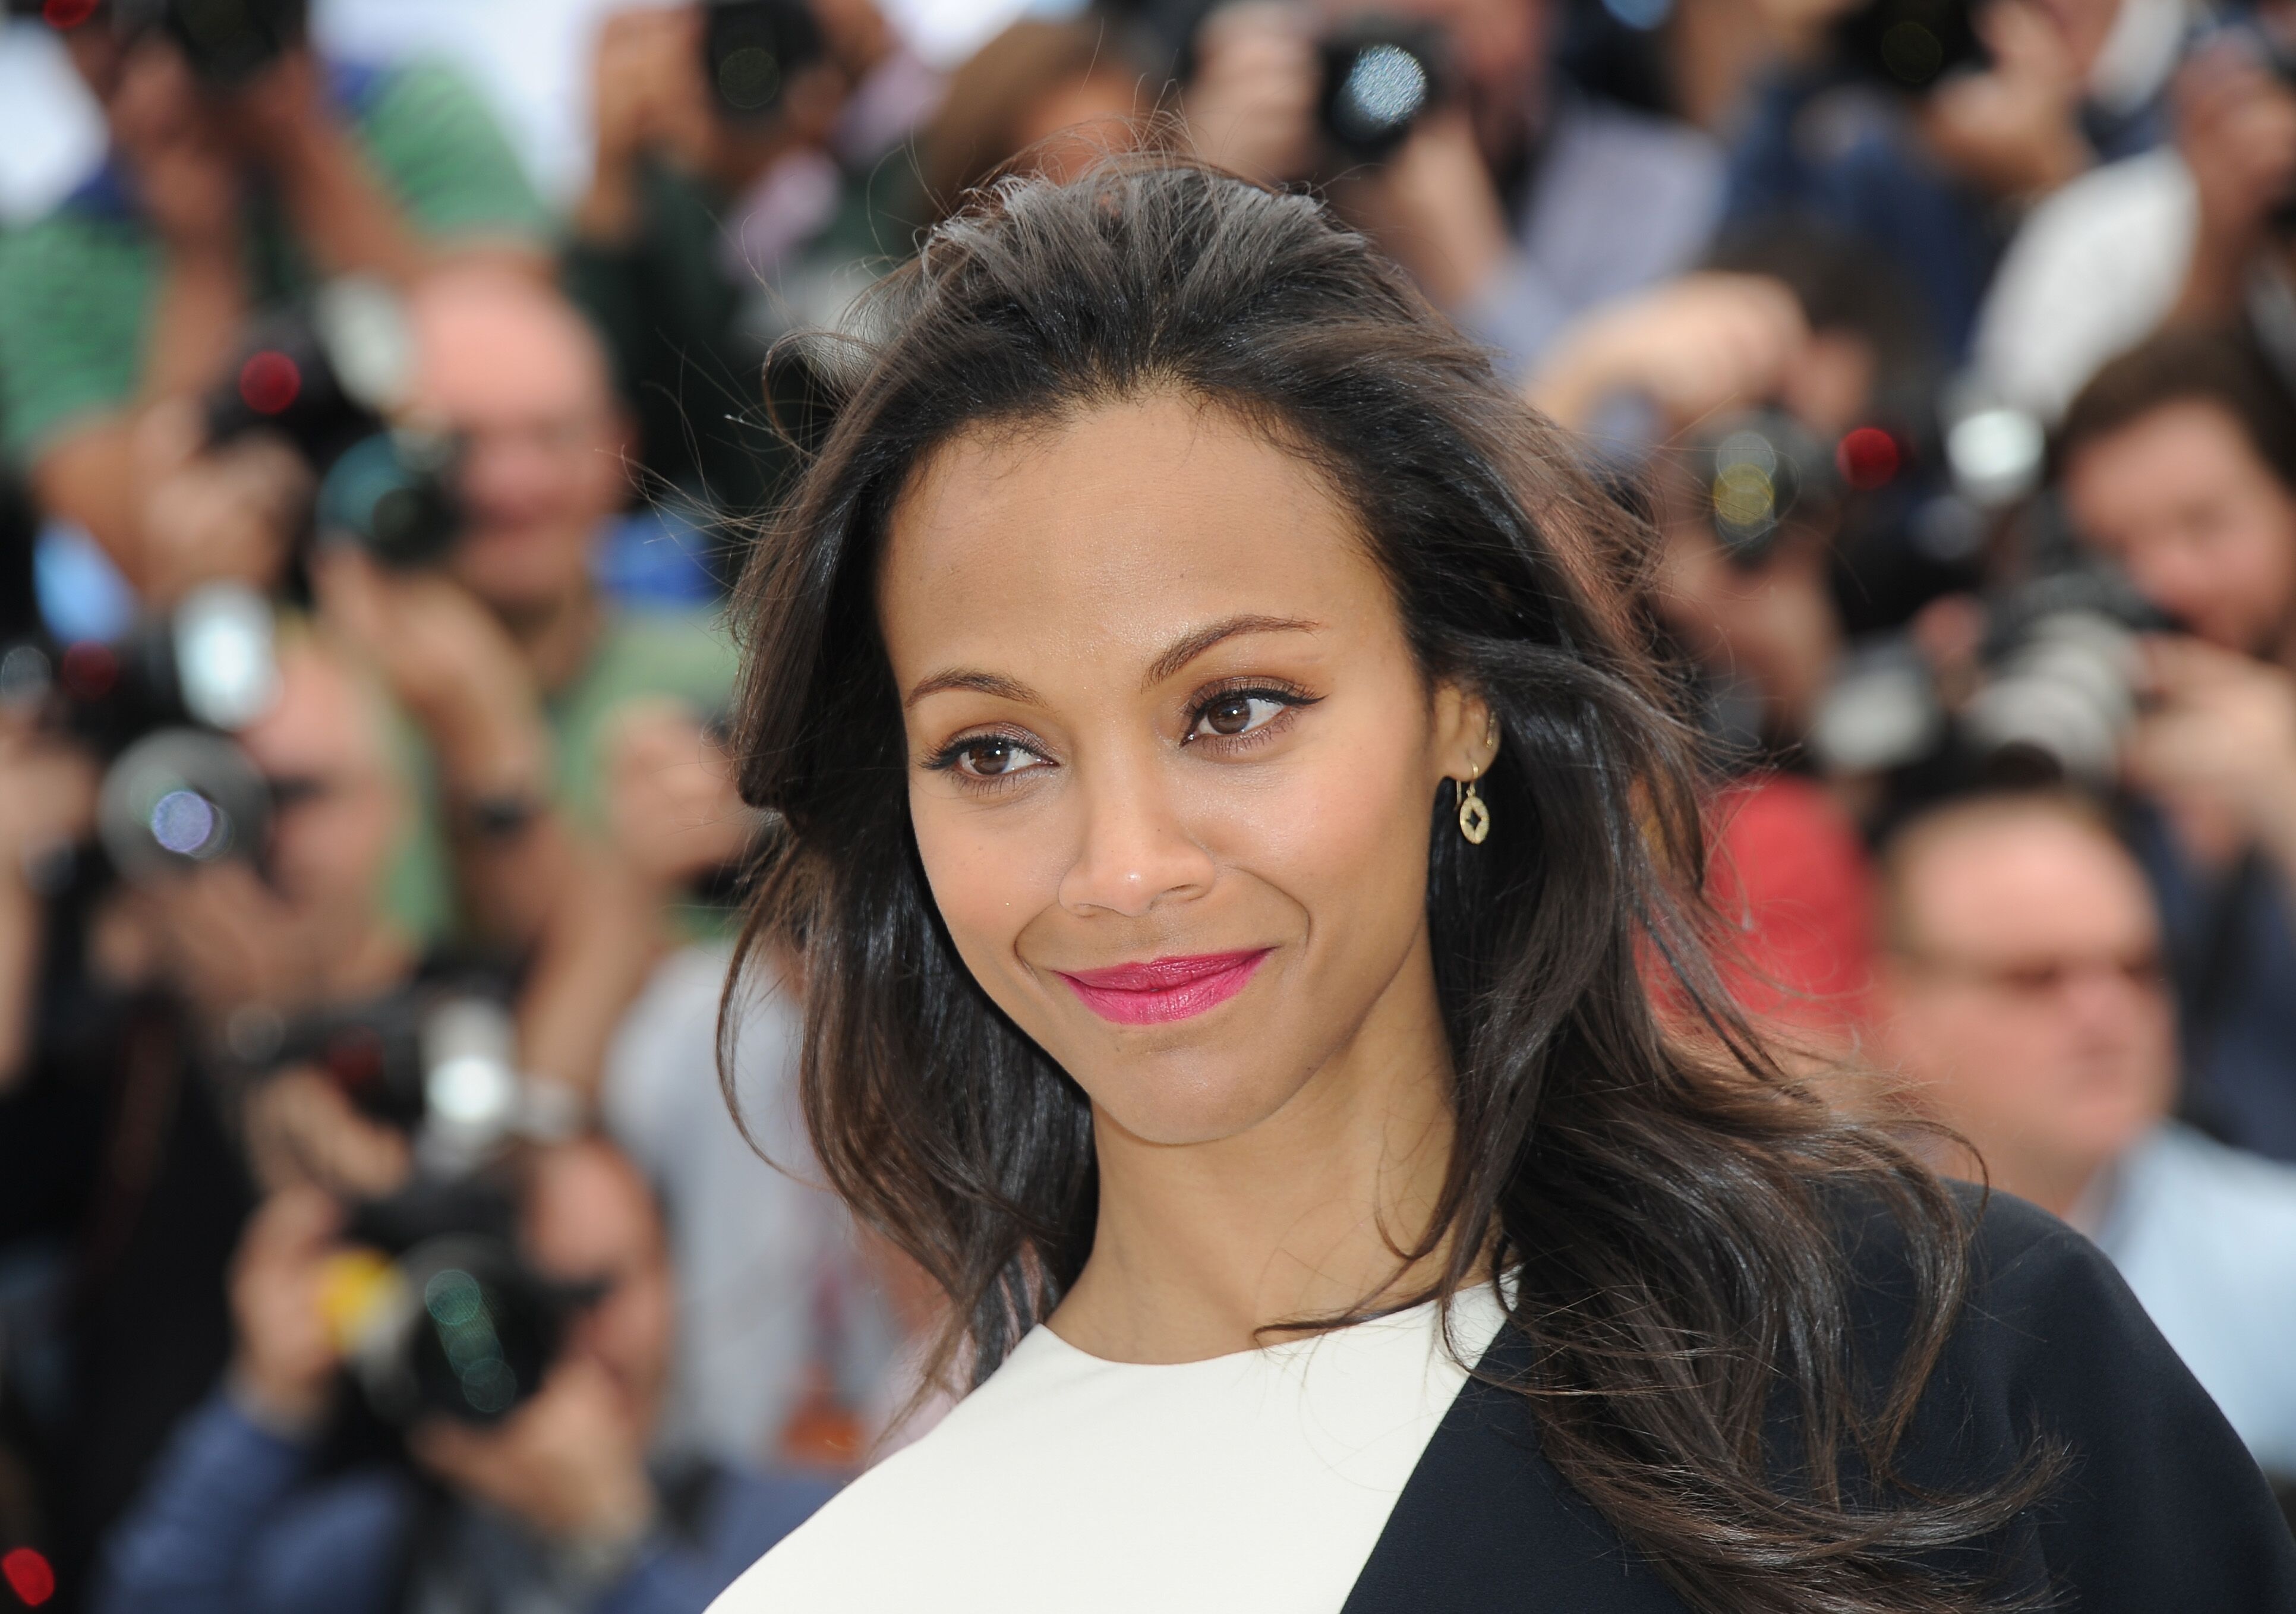 Actress Zoe Saldana attends the photocall for 'Blood Ties' at The 66th Annual Cannes Film Festival on May 20, 2013 in Cannes, France | Photo: Getty Images